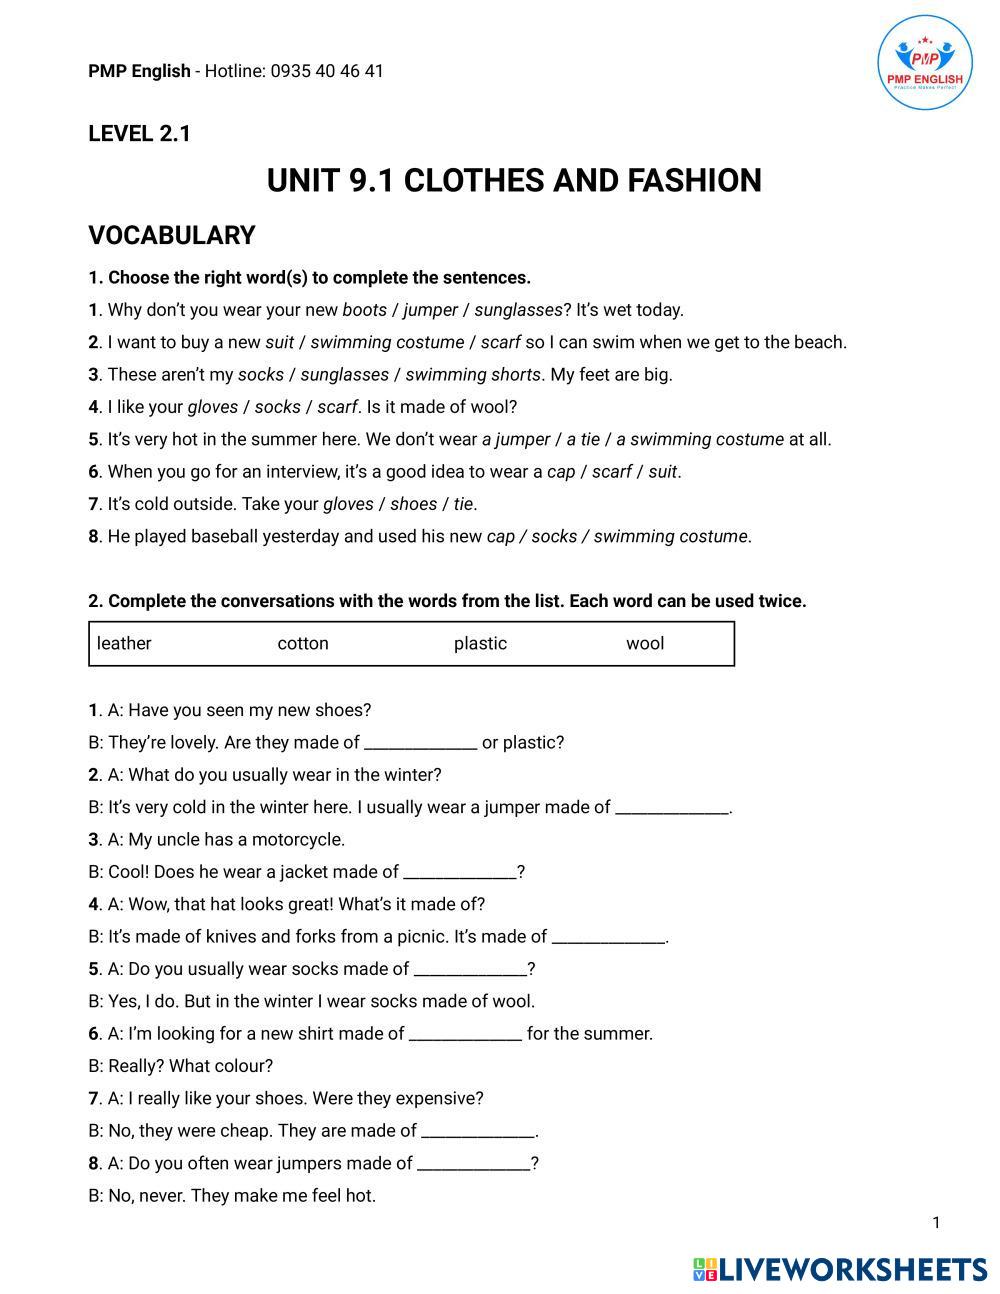 UNIT 9.1 CLOTHES AND FASHION | Live Worksheets